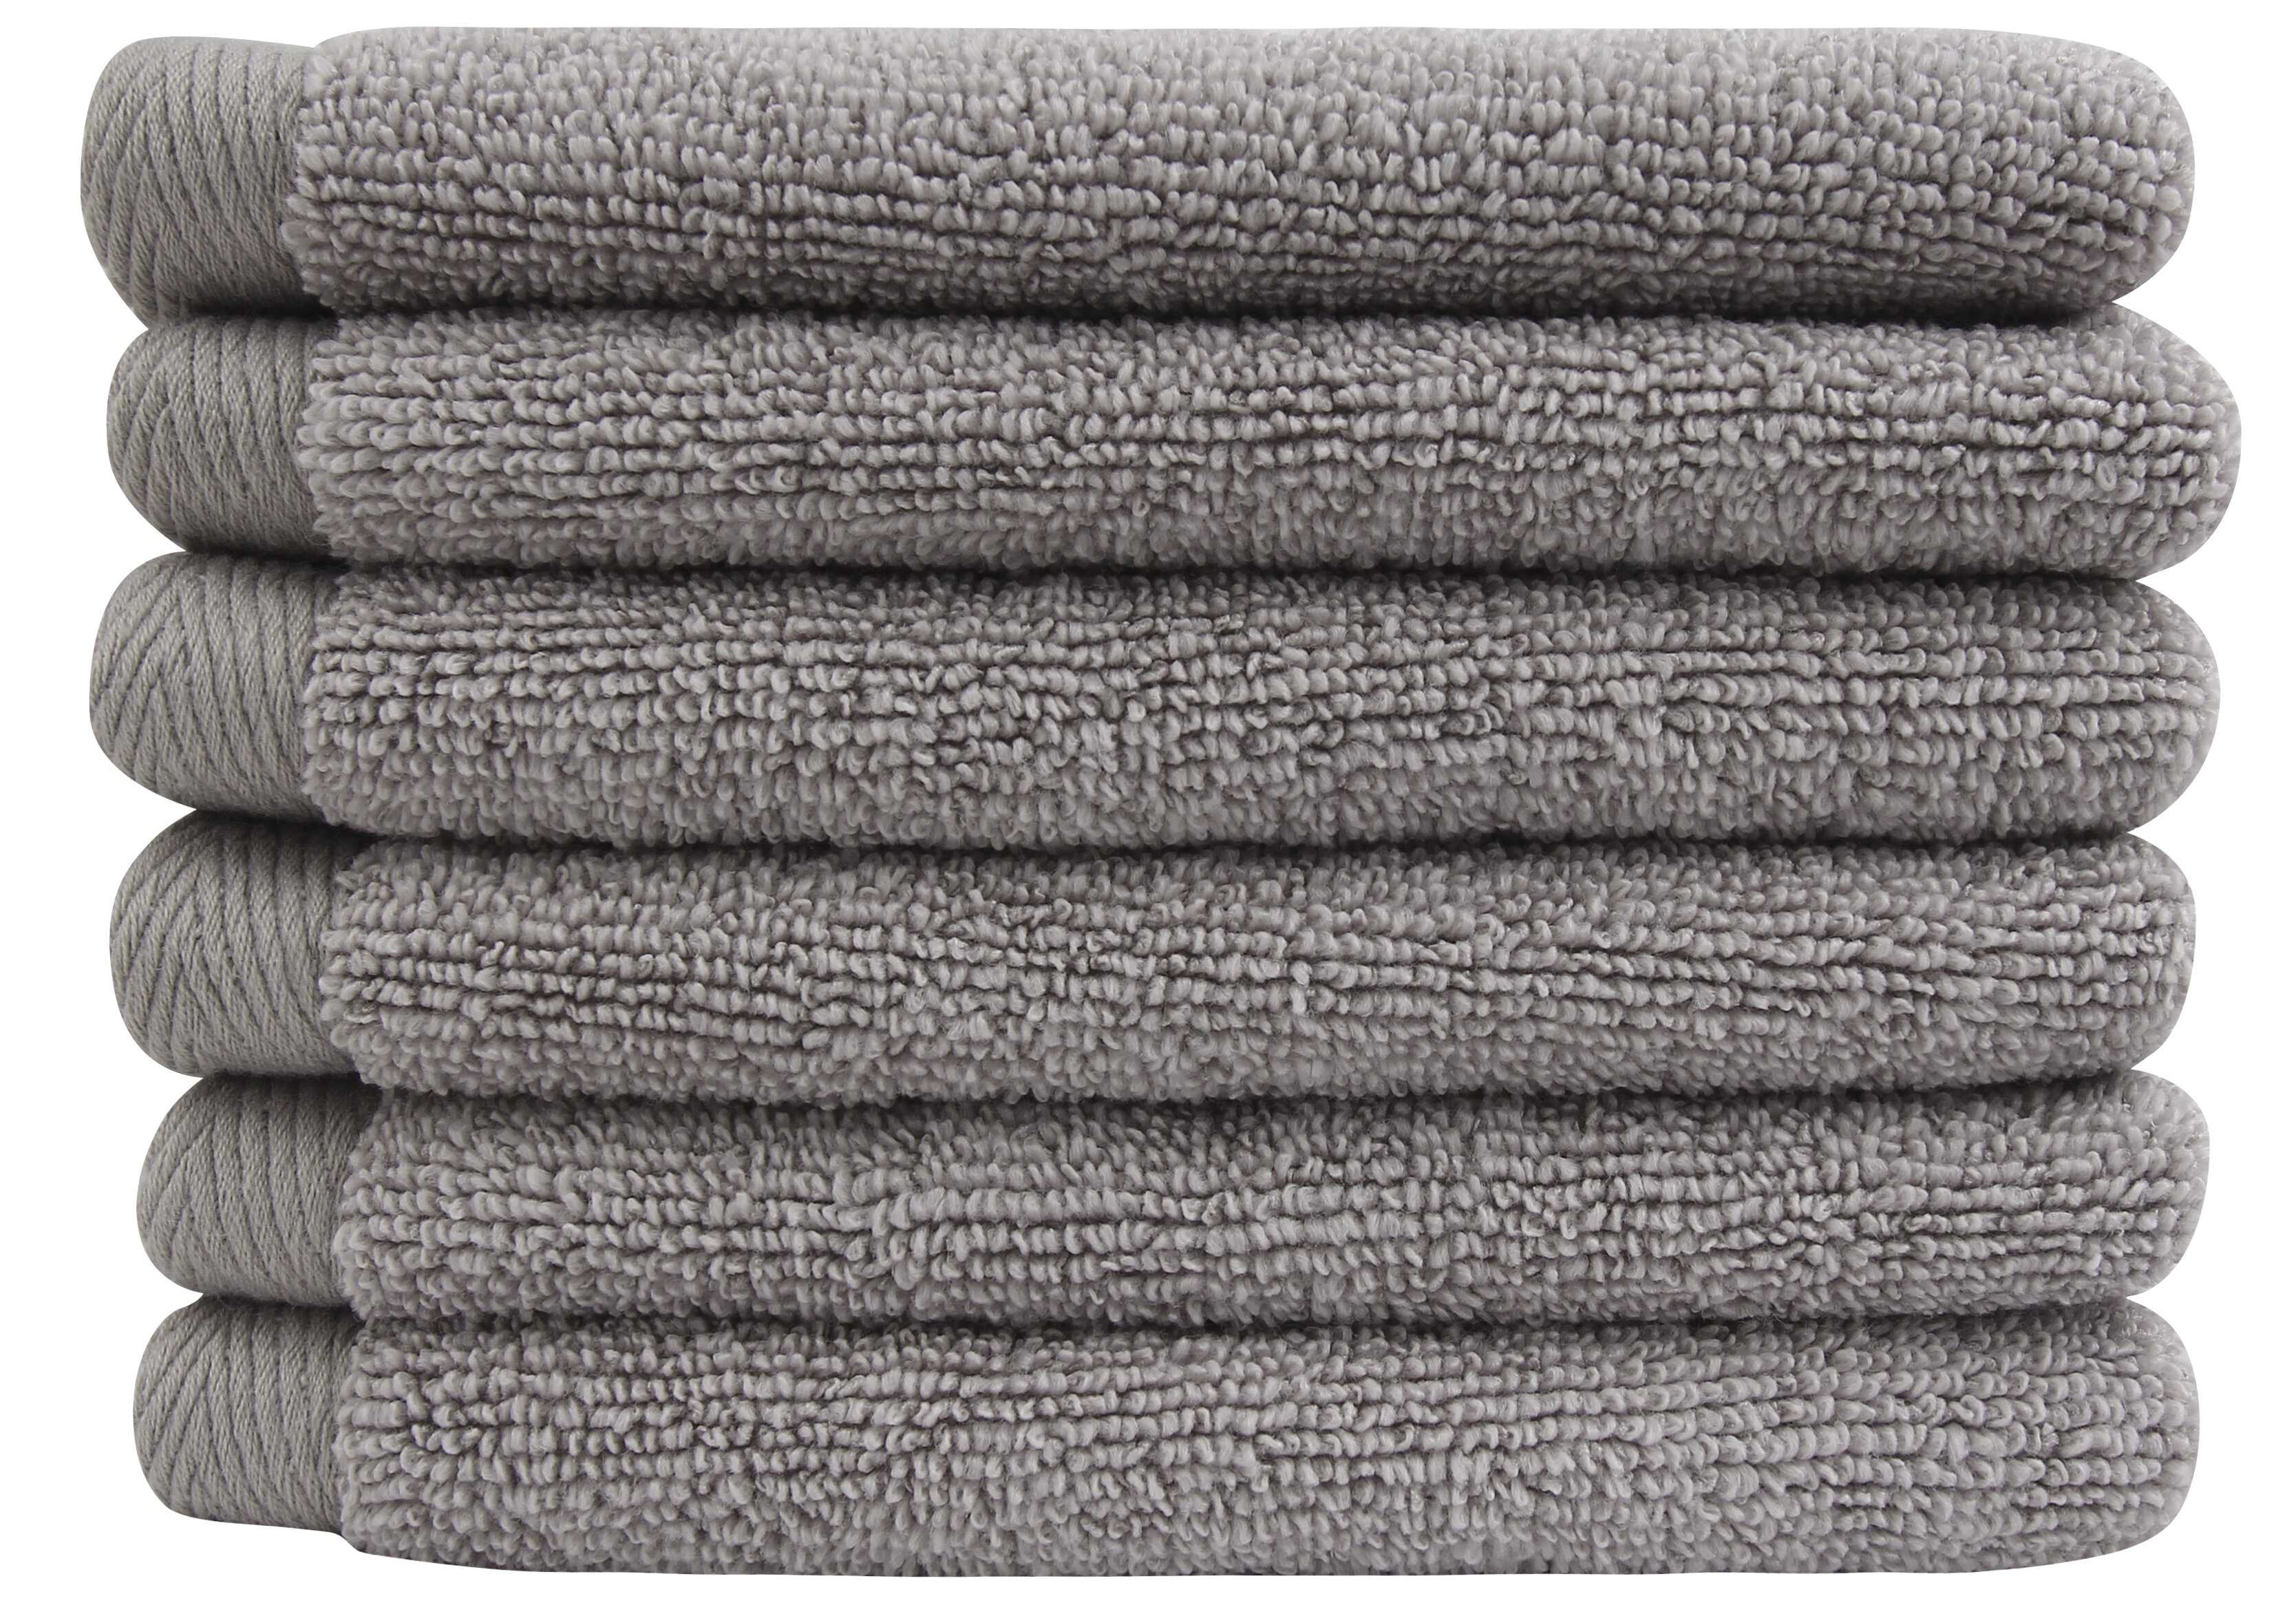 Everplush Classic Hotel Towels 6 Pack Terry Washcloths White White 6 Pack Terry  Washcloths